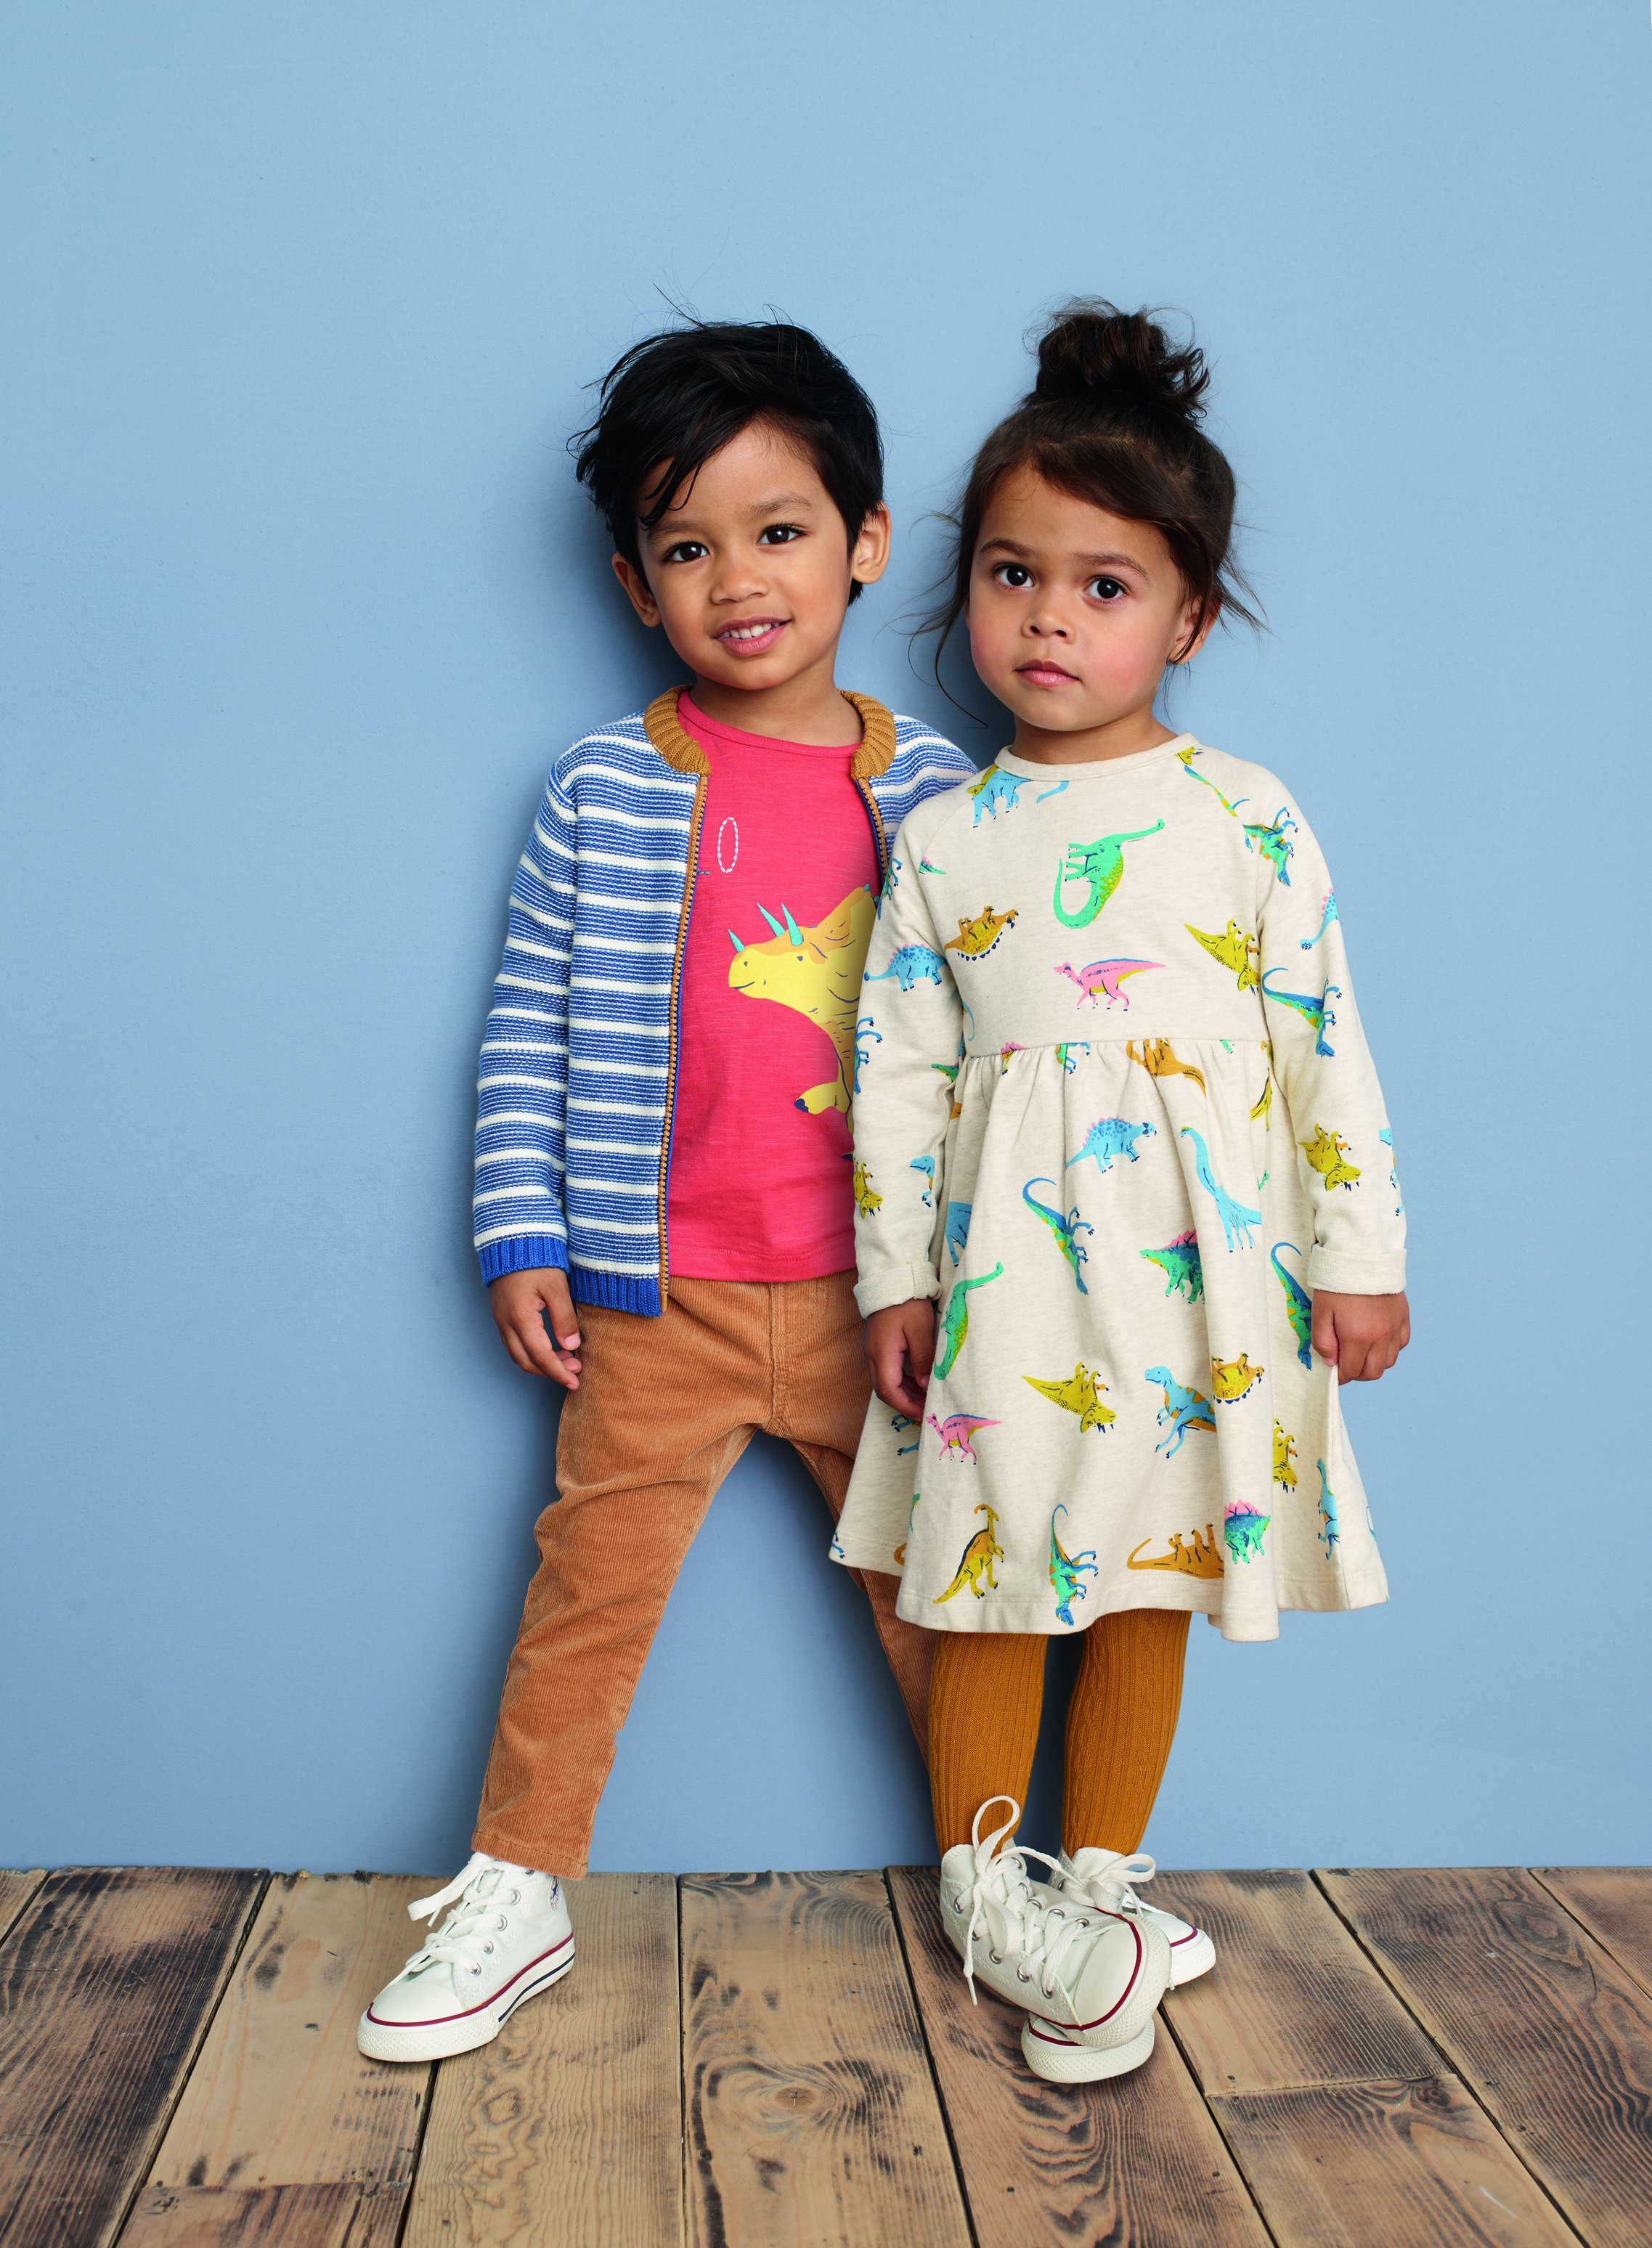 Where to find the cutest, gender-neutral kids' clothes